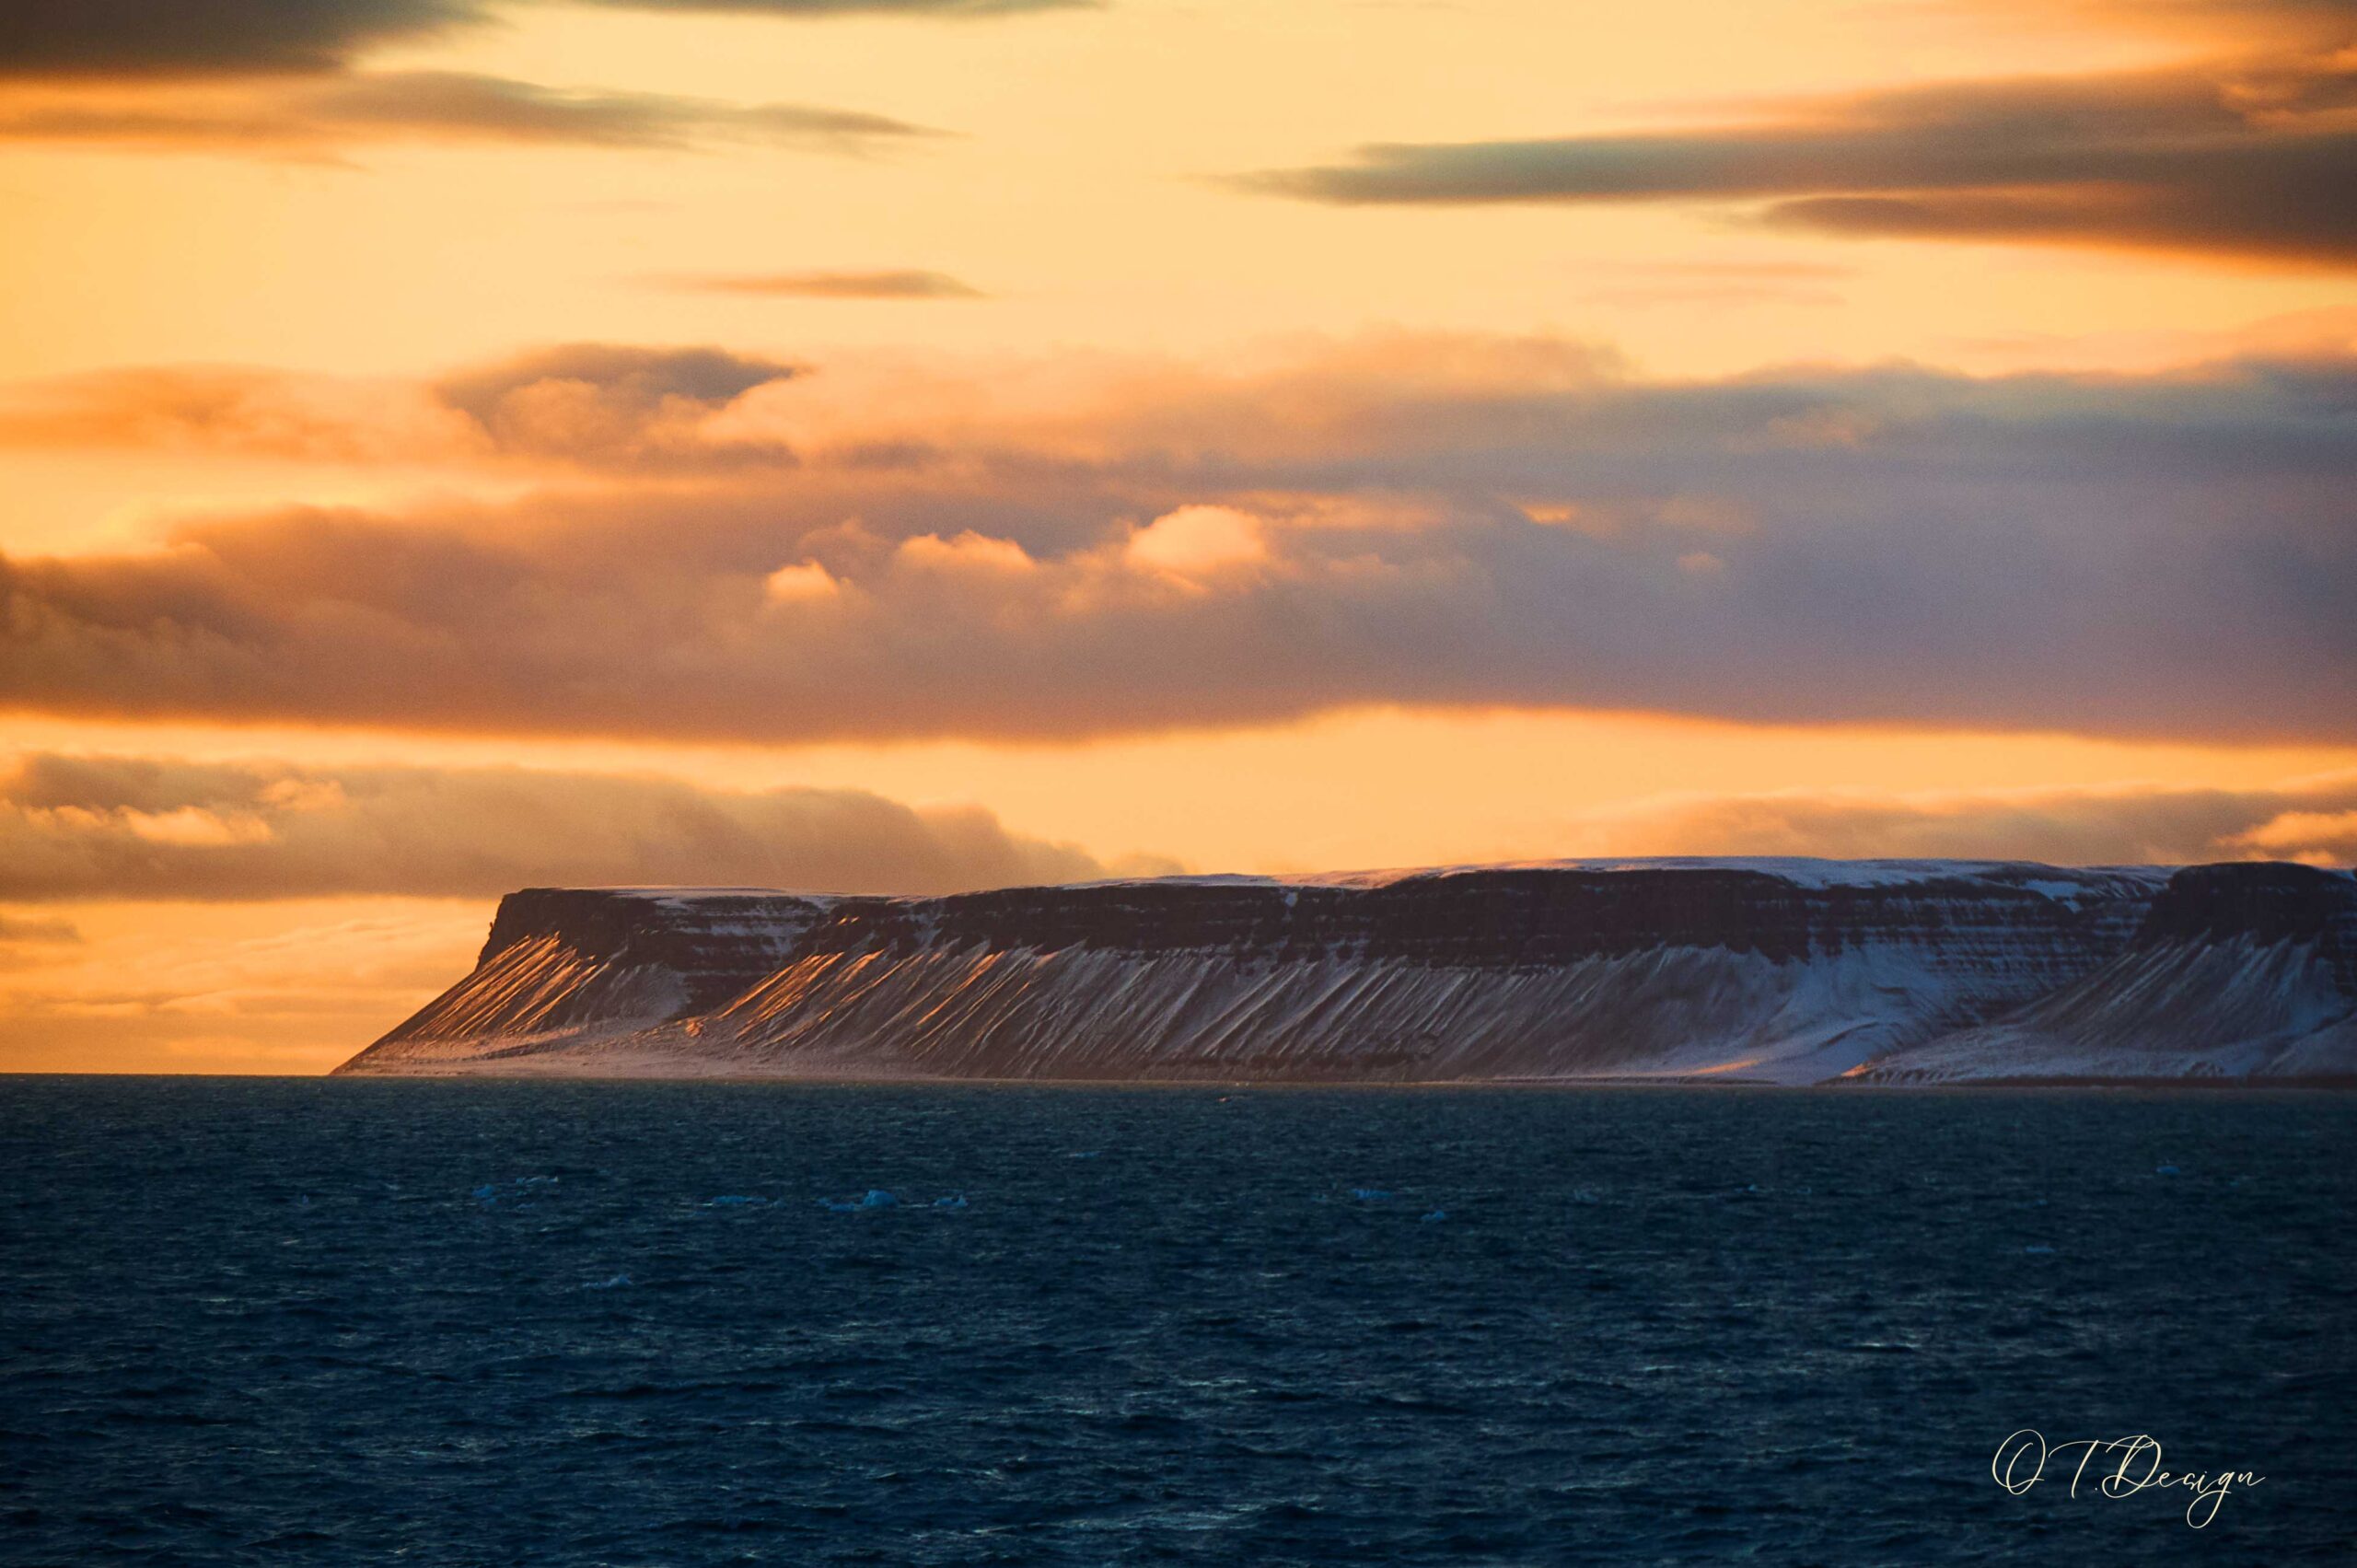 A Cliff's Majestic Silhouette in the Northwest Passage Sunset